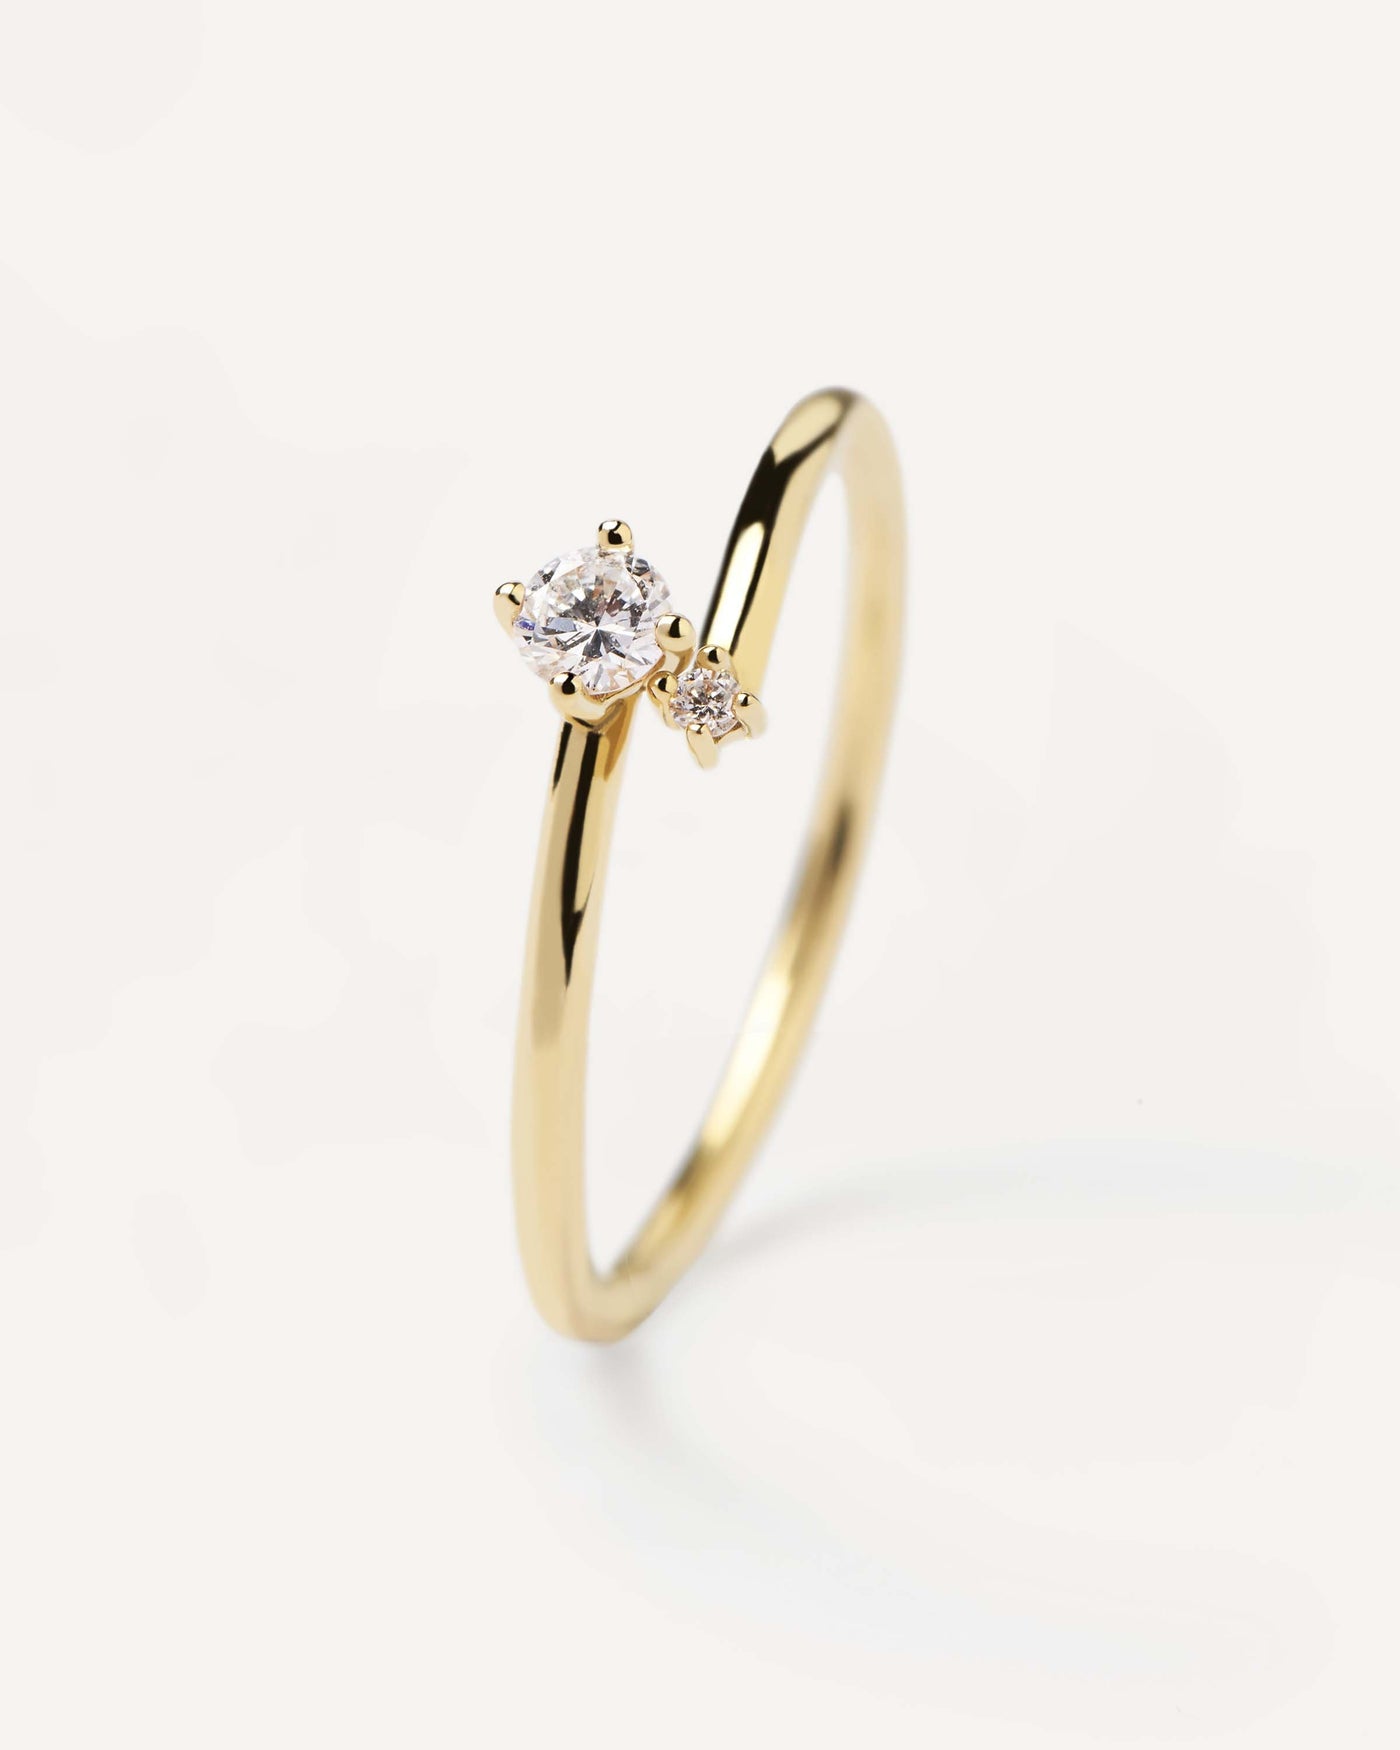 Diamonds and Yellow Gold Duo Ring - 18K solid yellow gold